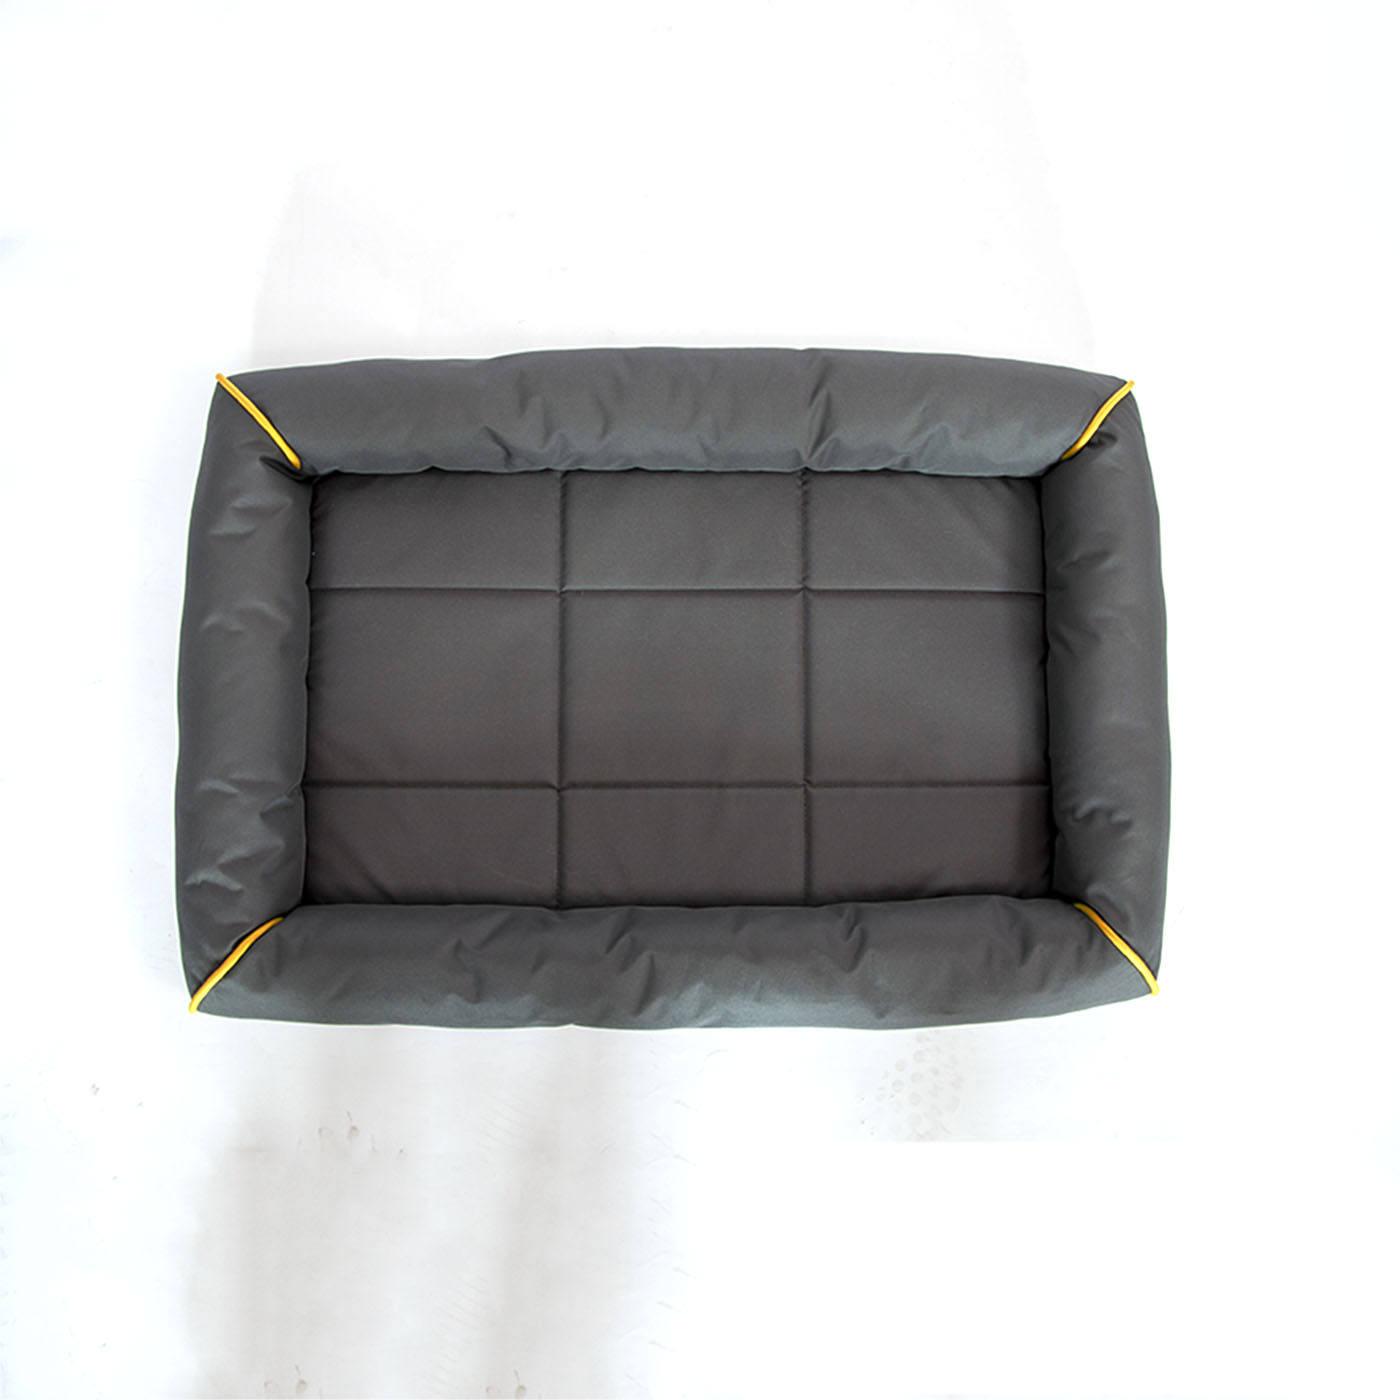 Customisable Great Dane Dog Bed Heavy Duty Dog Bed Dog Bed Cage Crate Matt Chew Resistant Waterproof